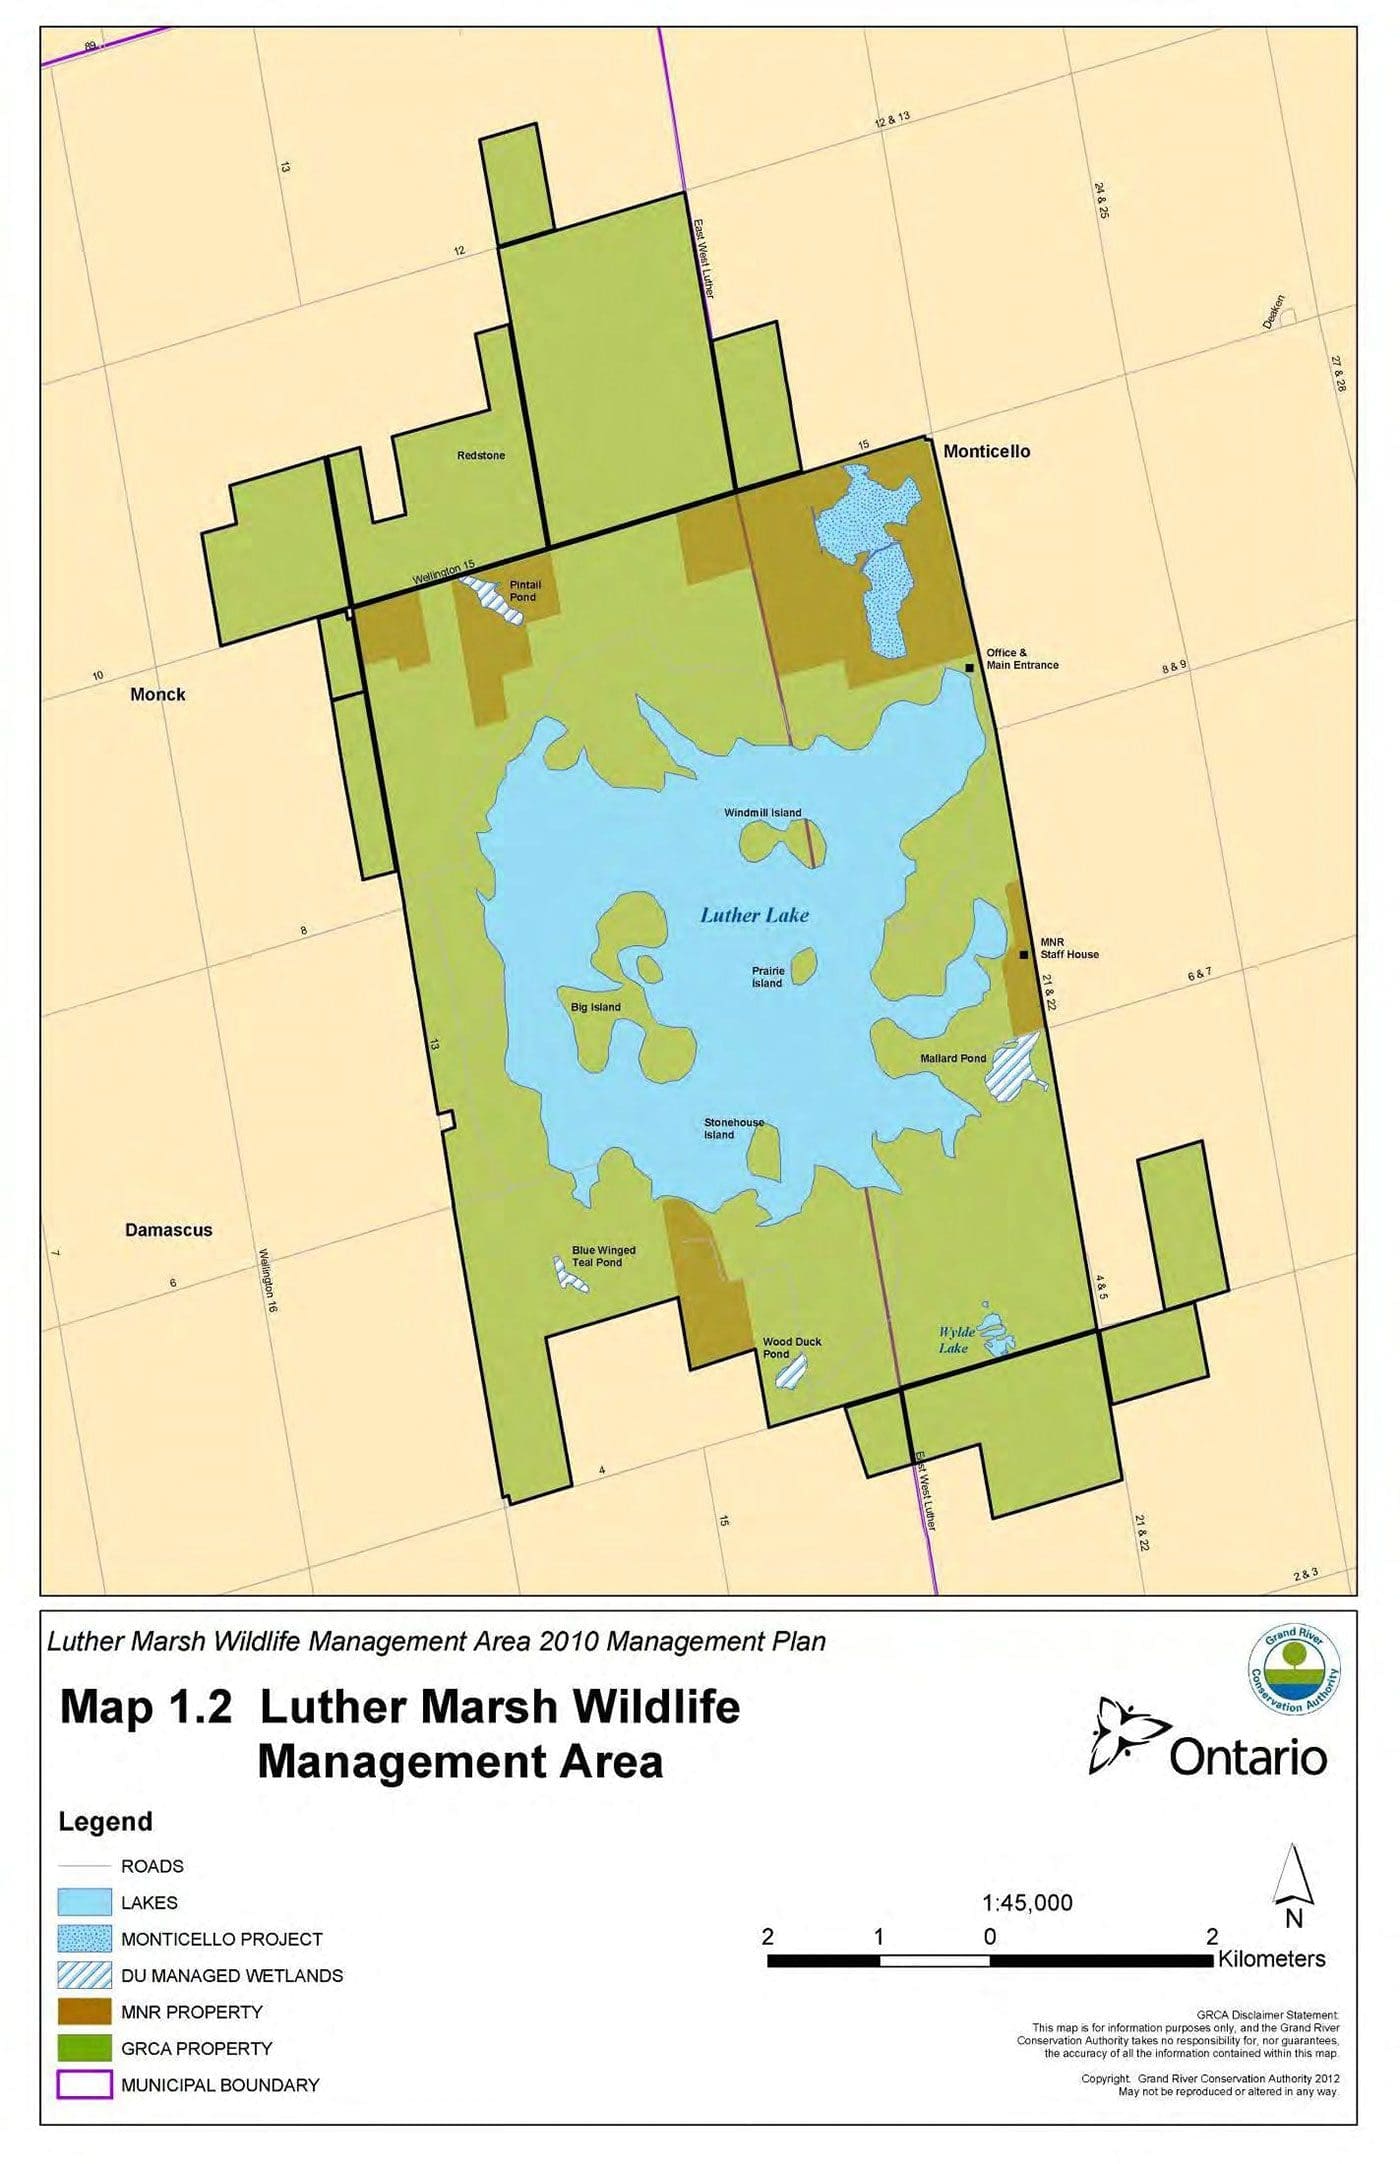 Luther Marsh Wildlife Management Area Map 1.2